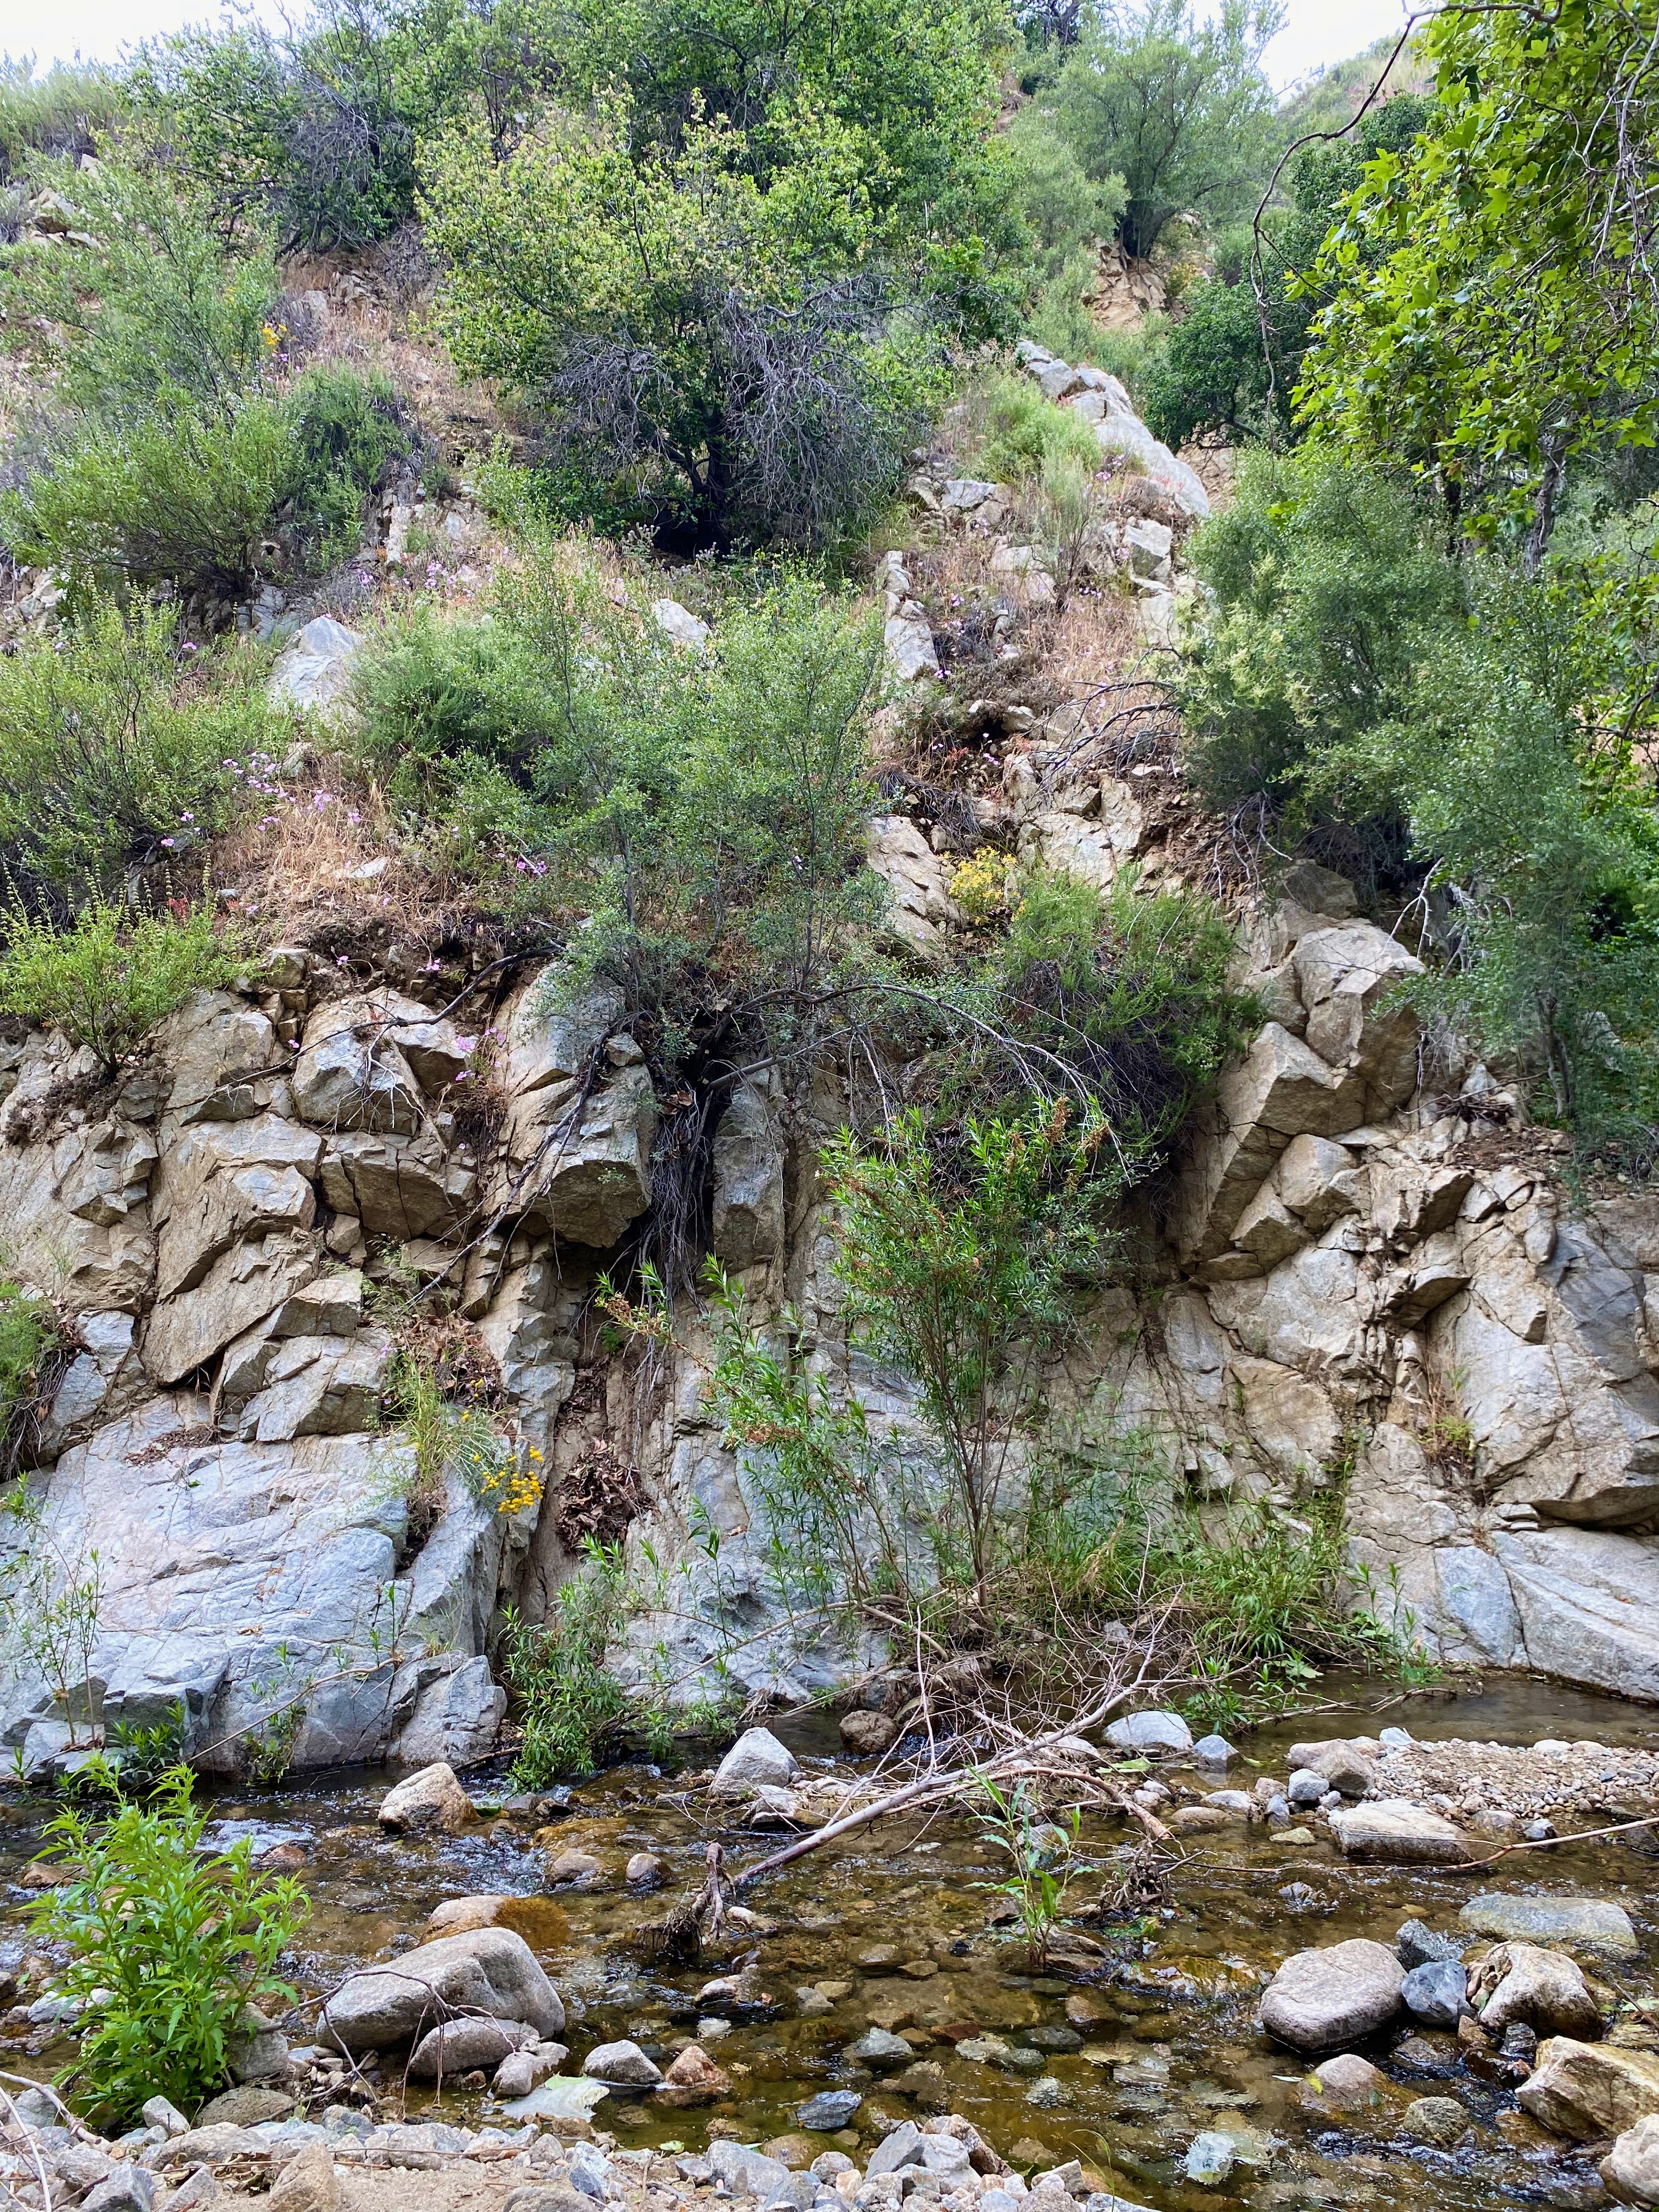 A rock wall about a half mile along the Placerita Canyon trail.